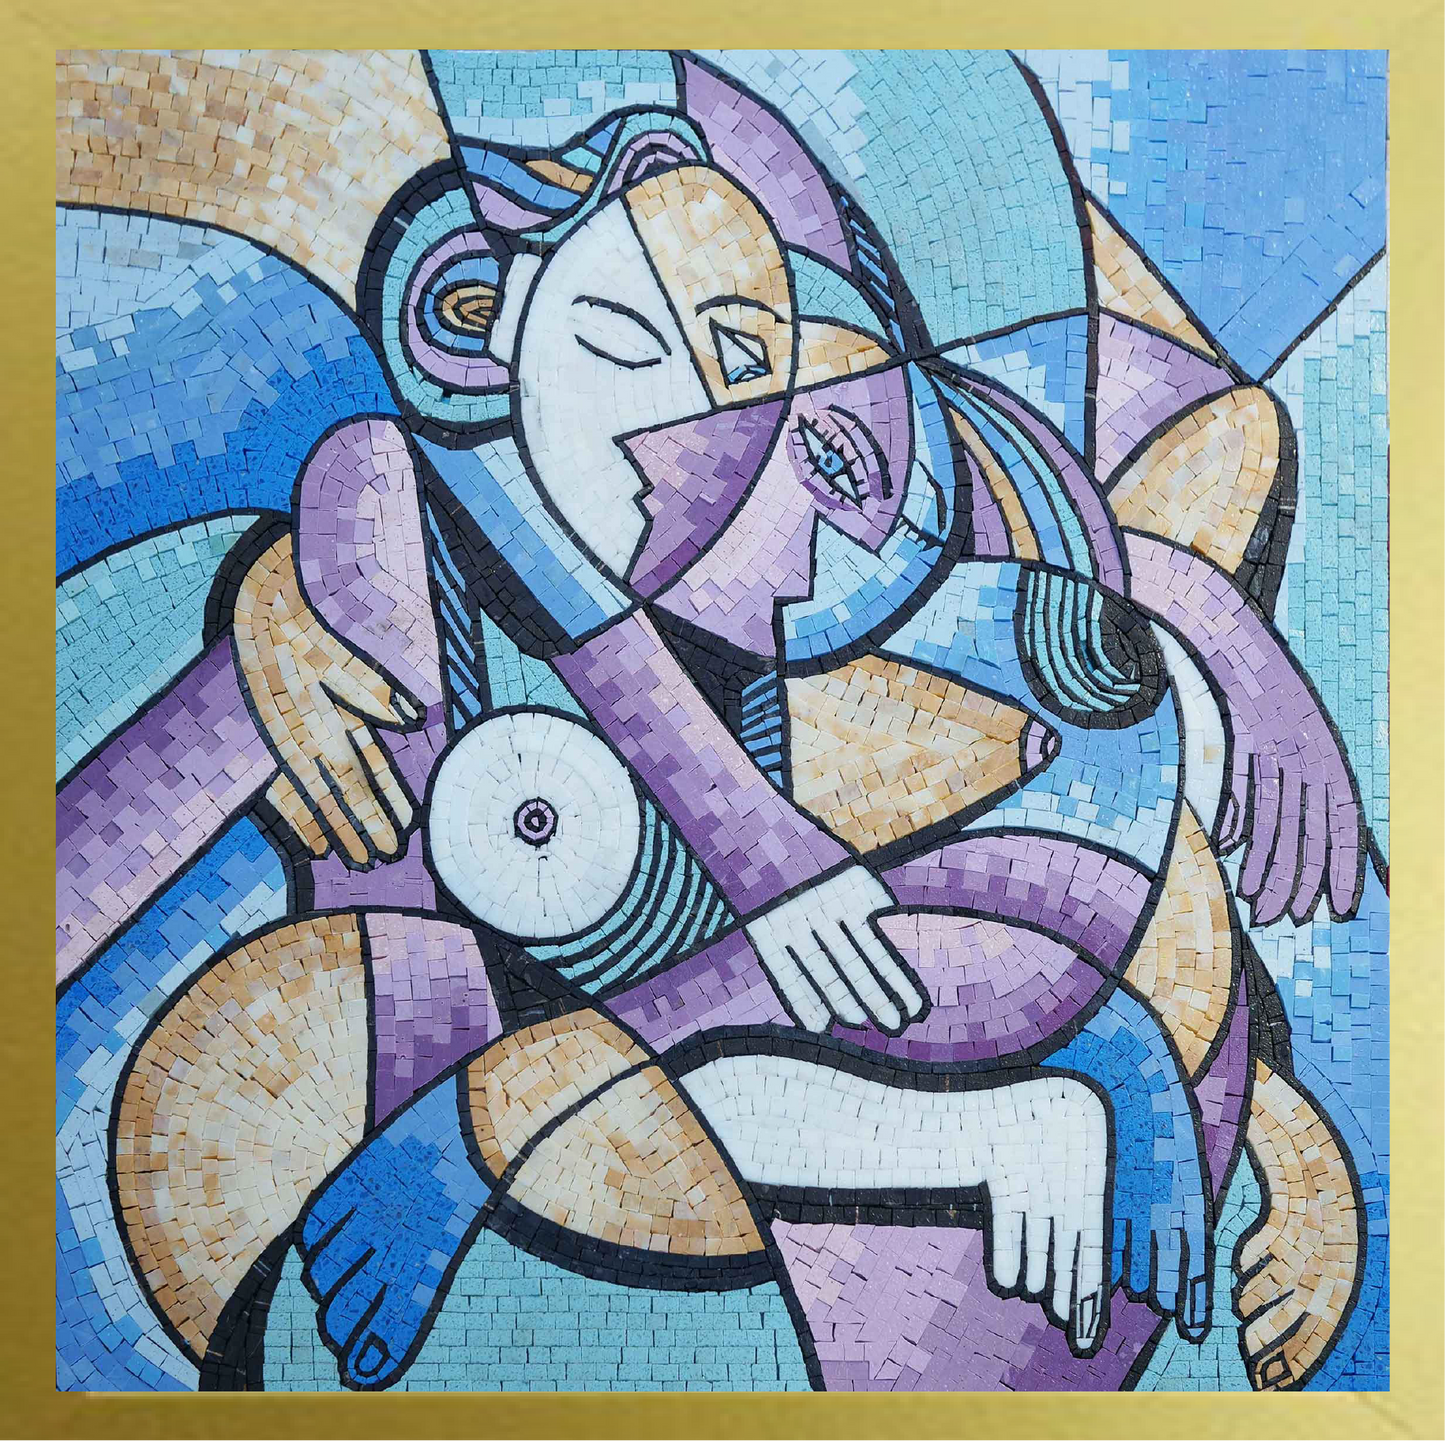 anthony fablos's "endless love" - mosaic reproduction